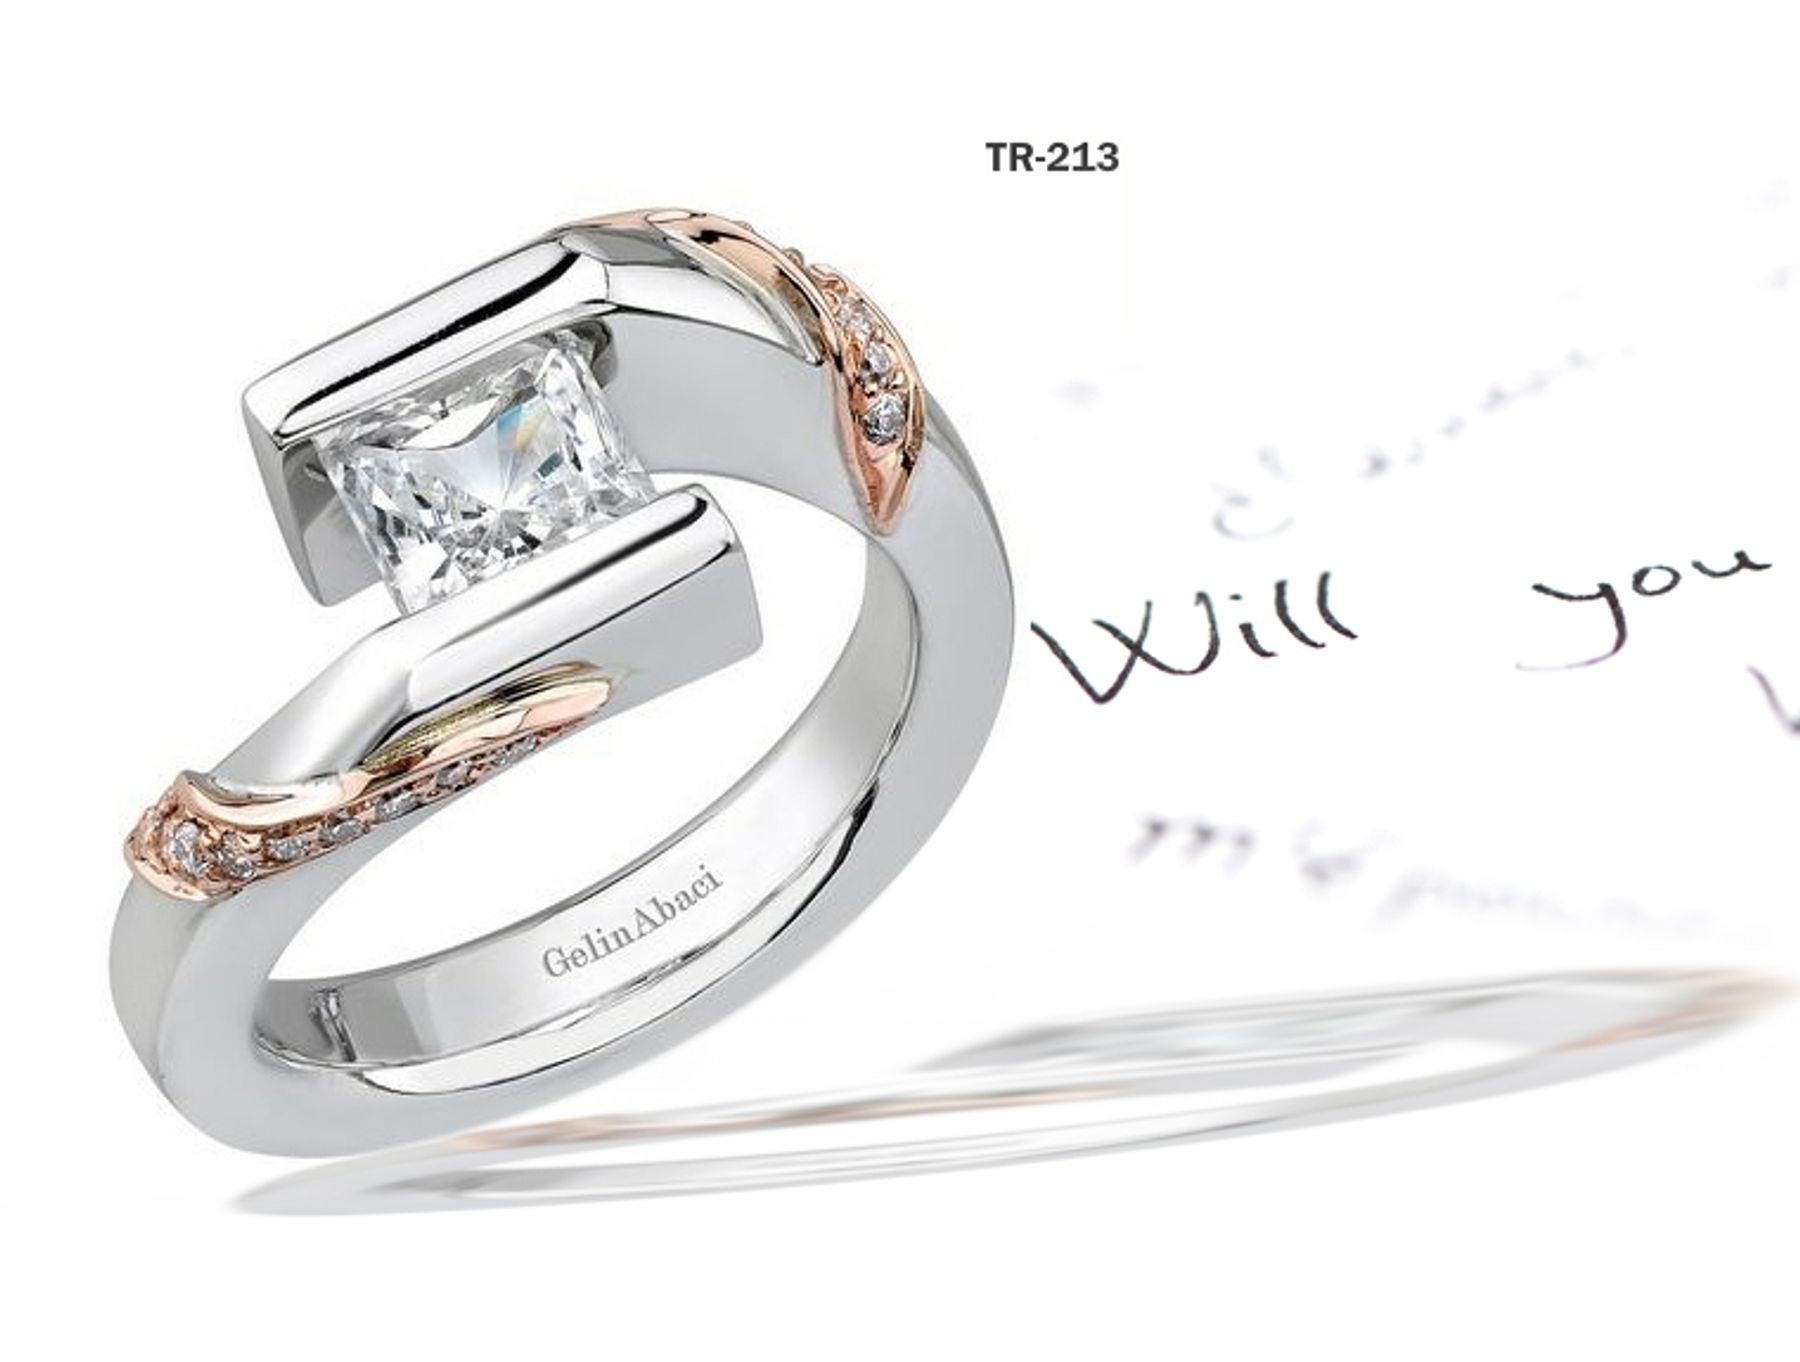 Exclusive Jewelry: New Diamond Engagement Rings in Modern Settings